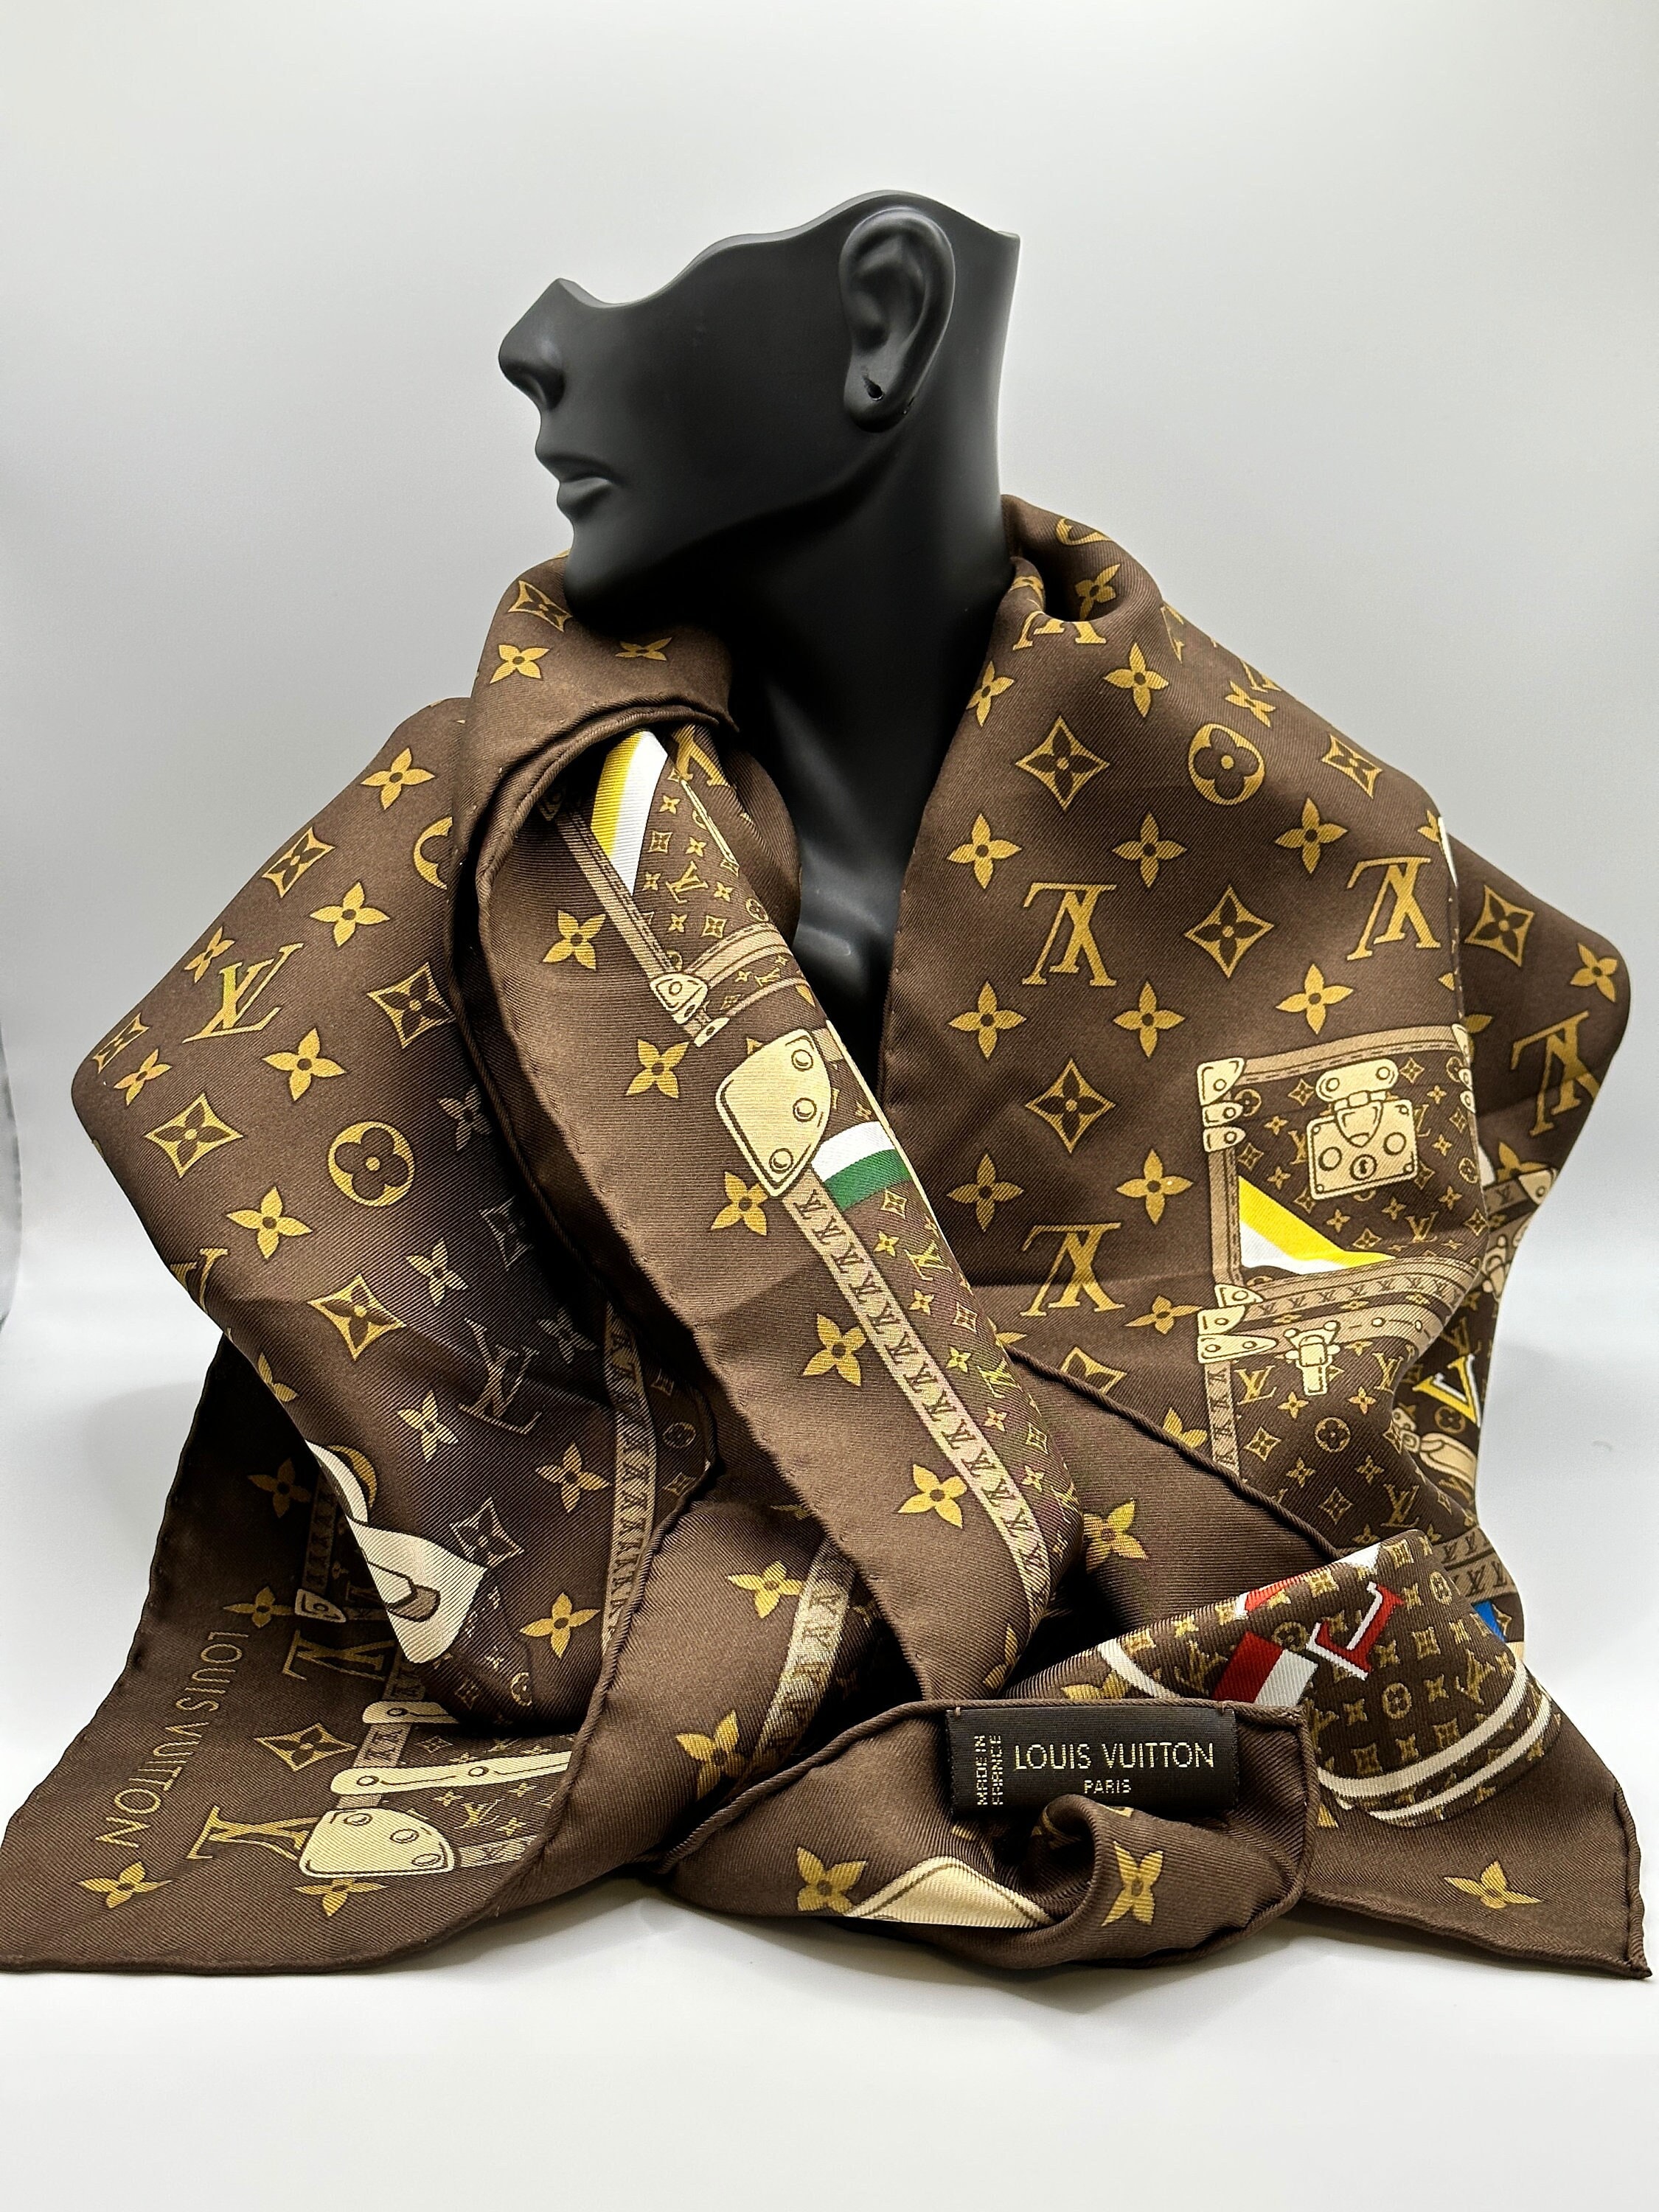 New Louis Vuitton Classic Old Floral Silk Scarf Womens Fashion Watches   Accessories Scarves on Carousell